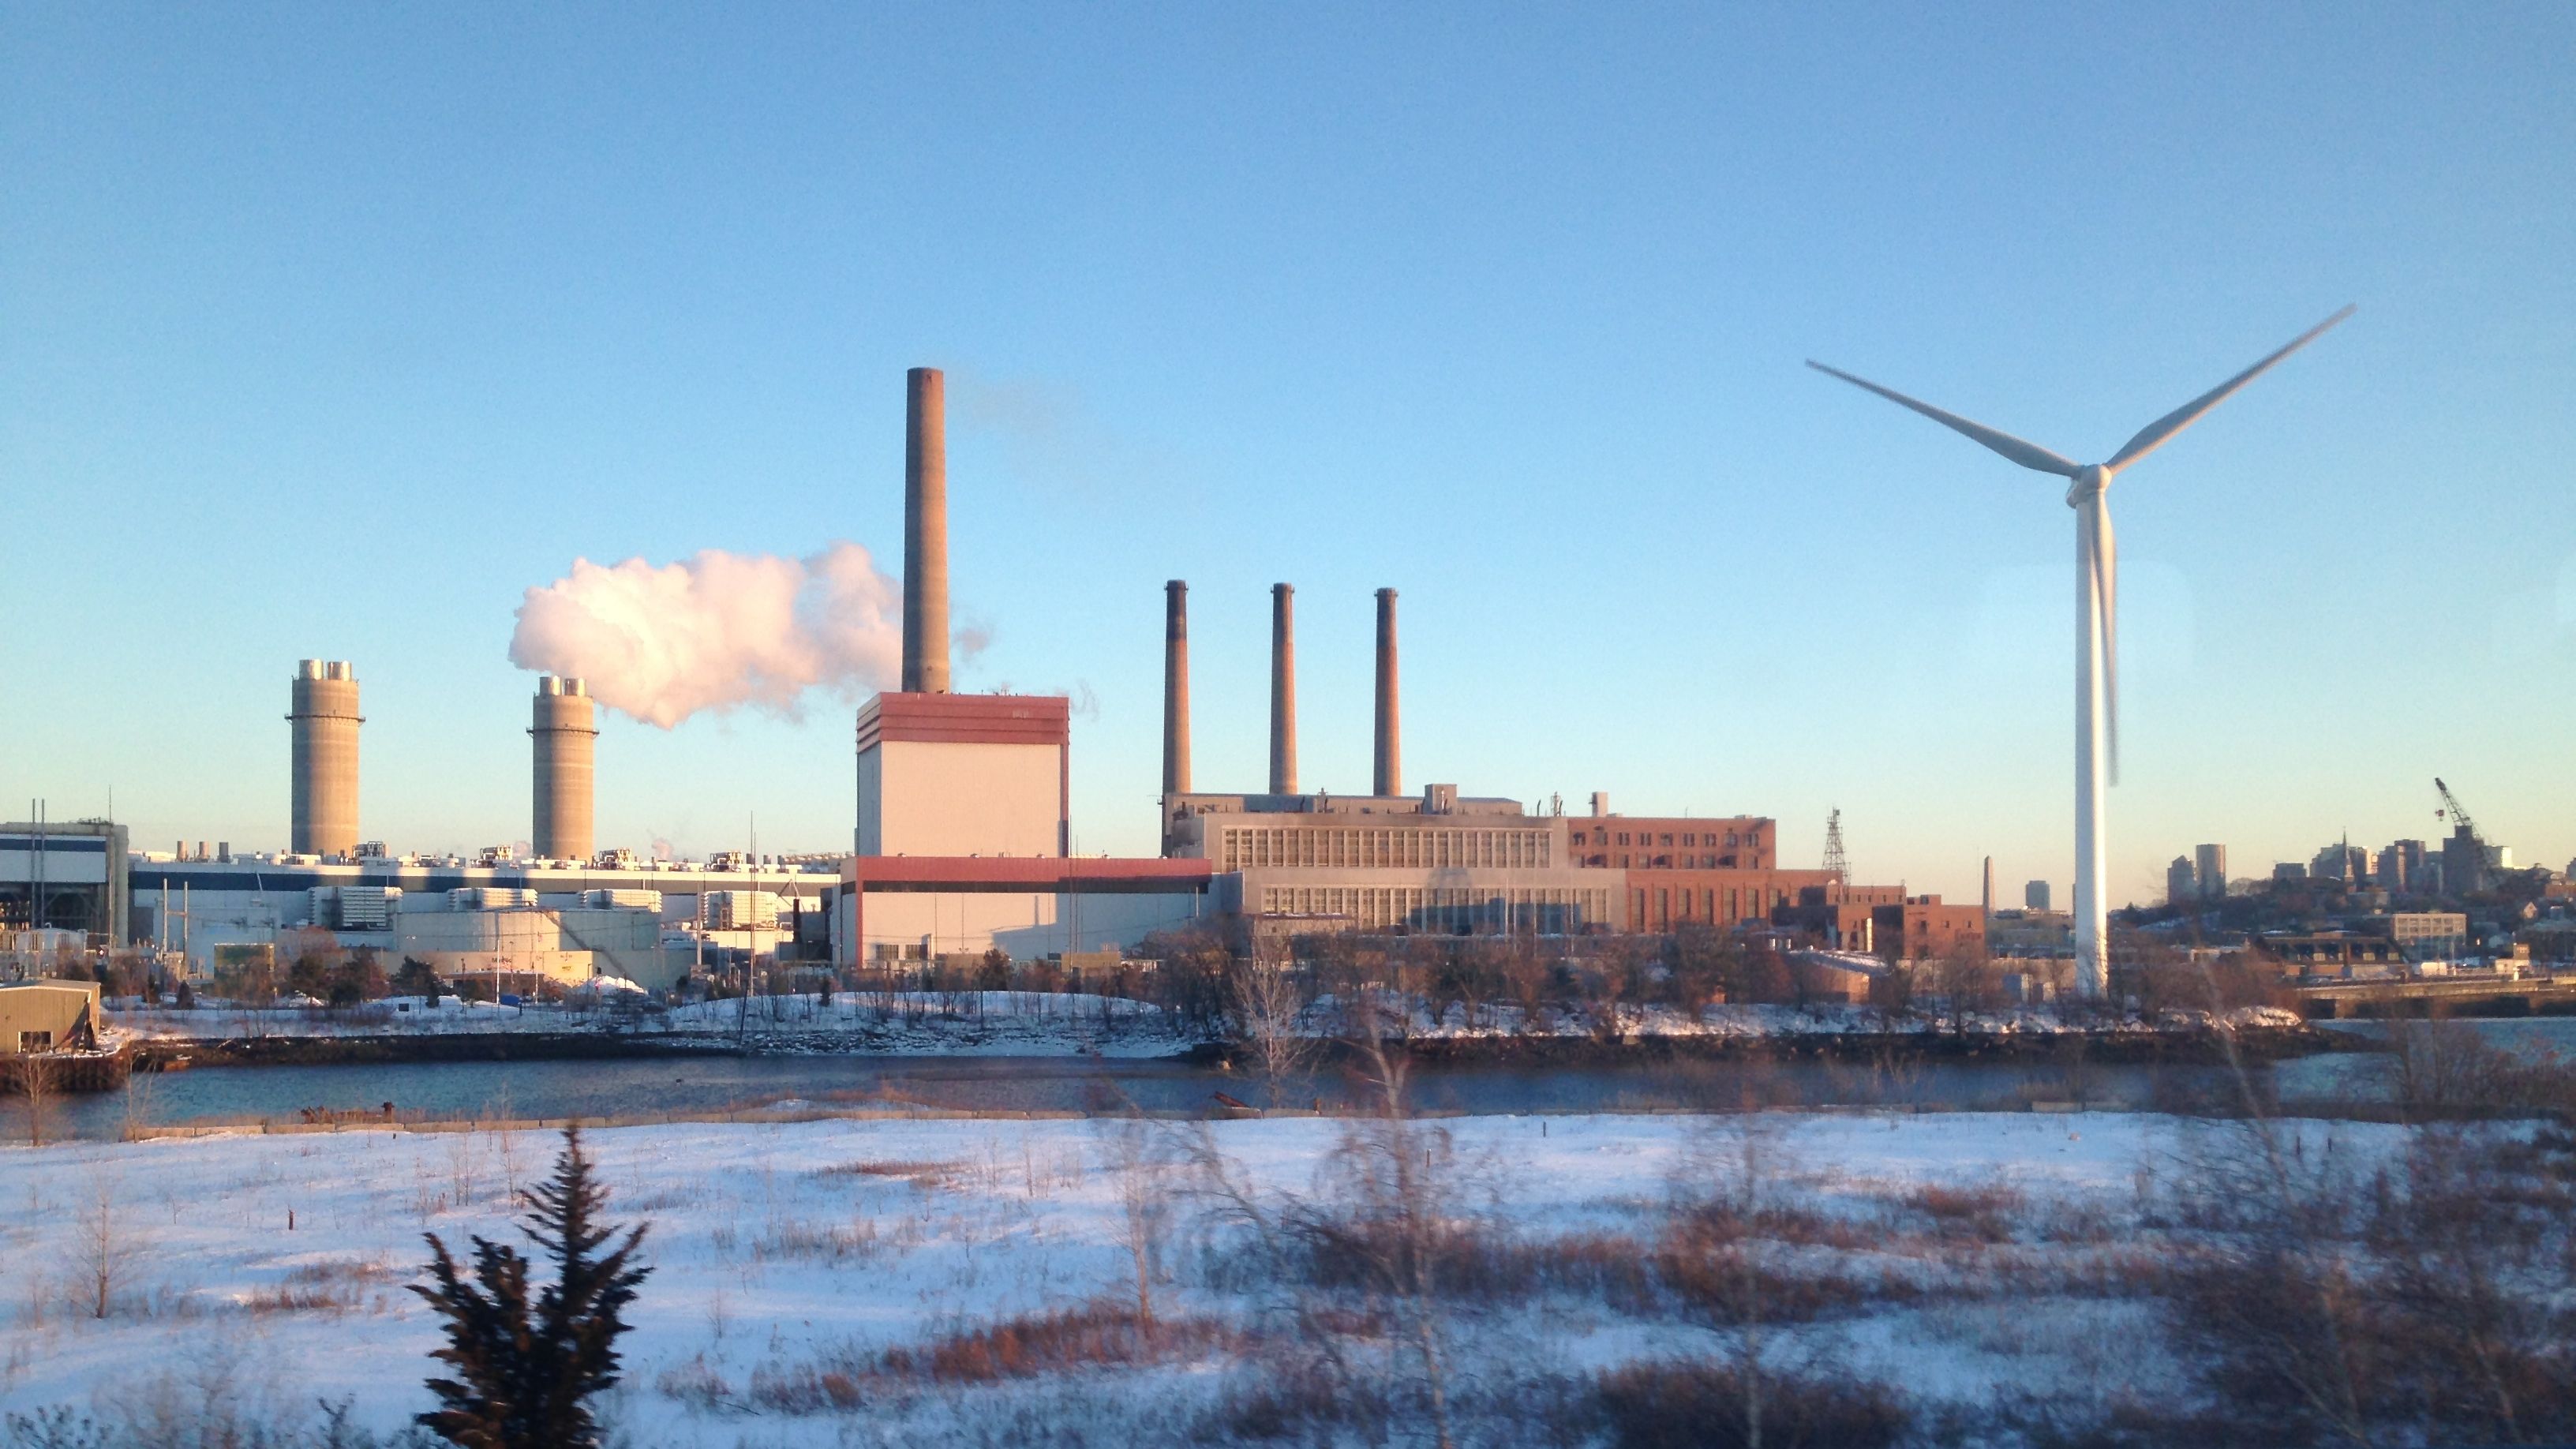 Boston’s incursion into Everett, turbine, bordered by the Mystic Generating Station, fossil power plant.